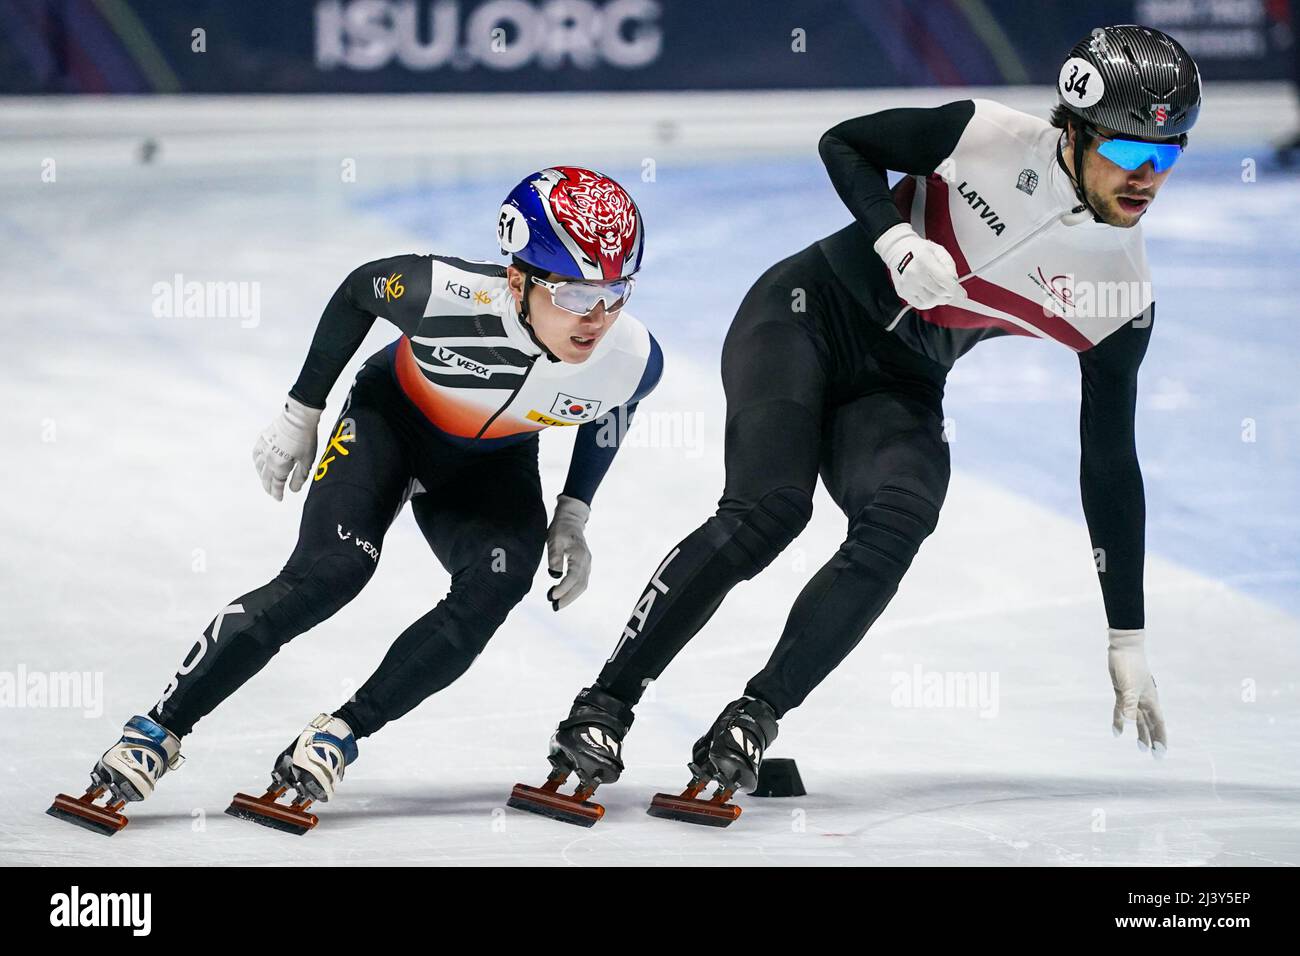 MONTREAL, CANADA - APRIL 10: Dongwook Kim of the Republic of Korea and Roberts Kruzbergs of Latvia during Day 3 of the ISU World Short Track Championships at the Maurice Richard Arena on April 10, 2022 in Montreal, Canada (Photo by Andre Weening/Orange Pictures) Stock Photo